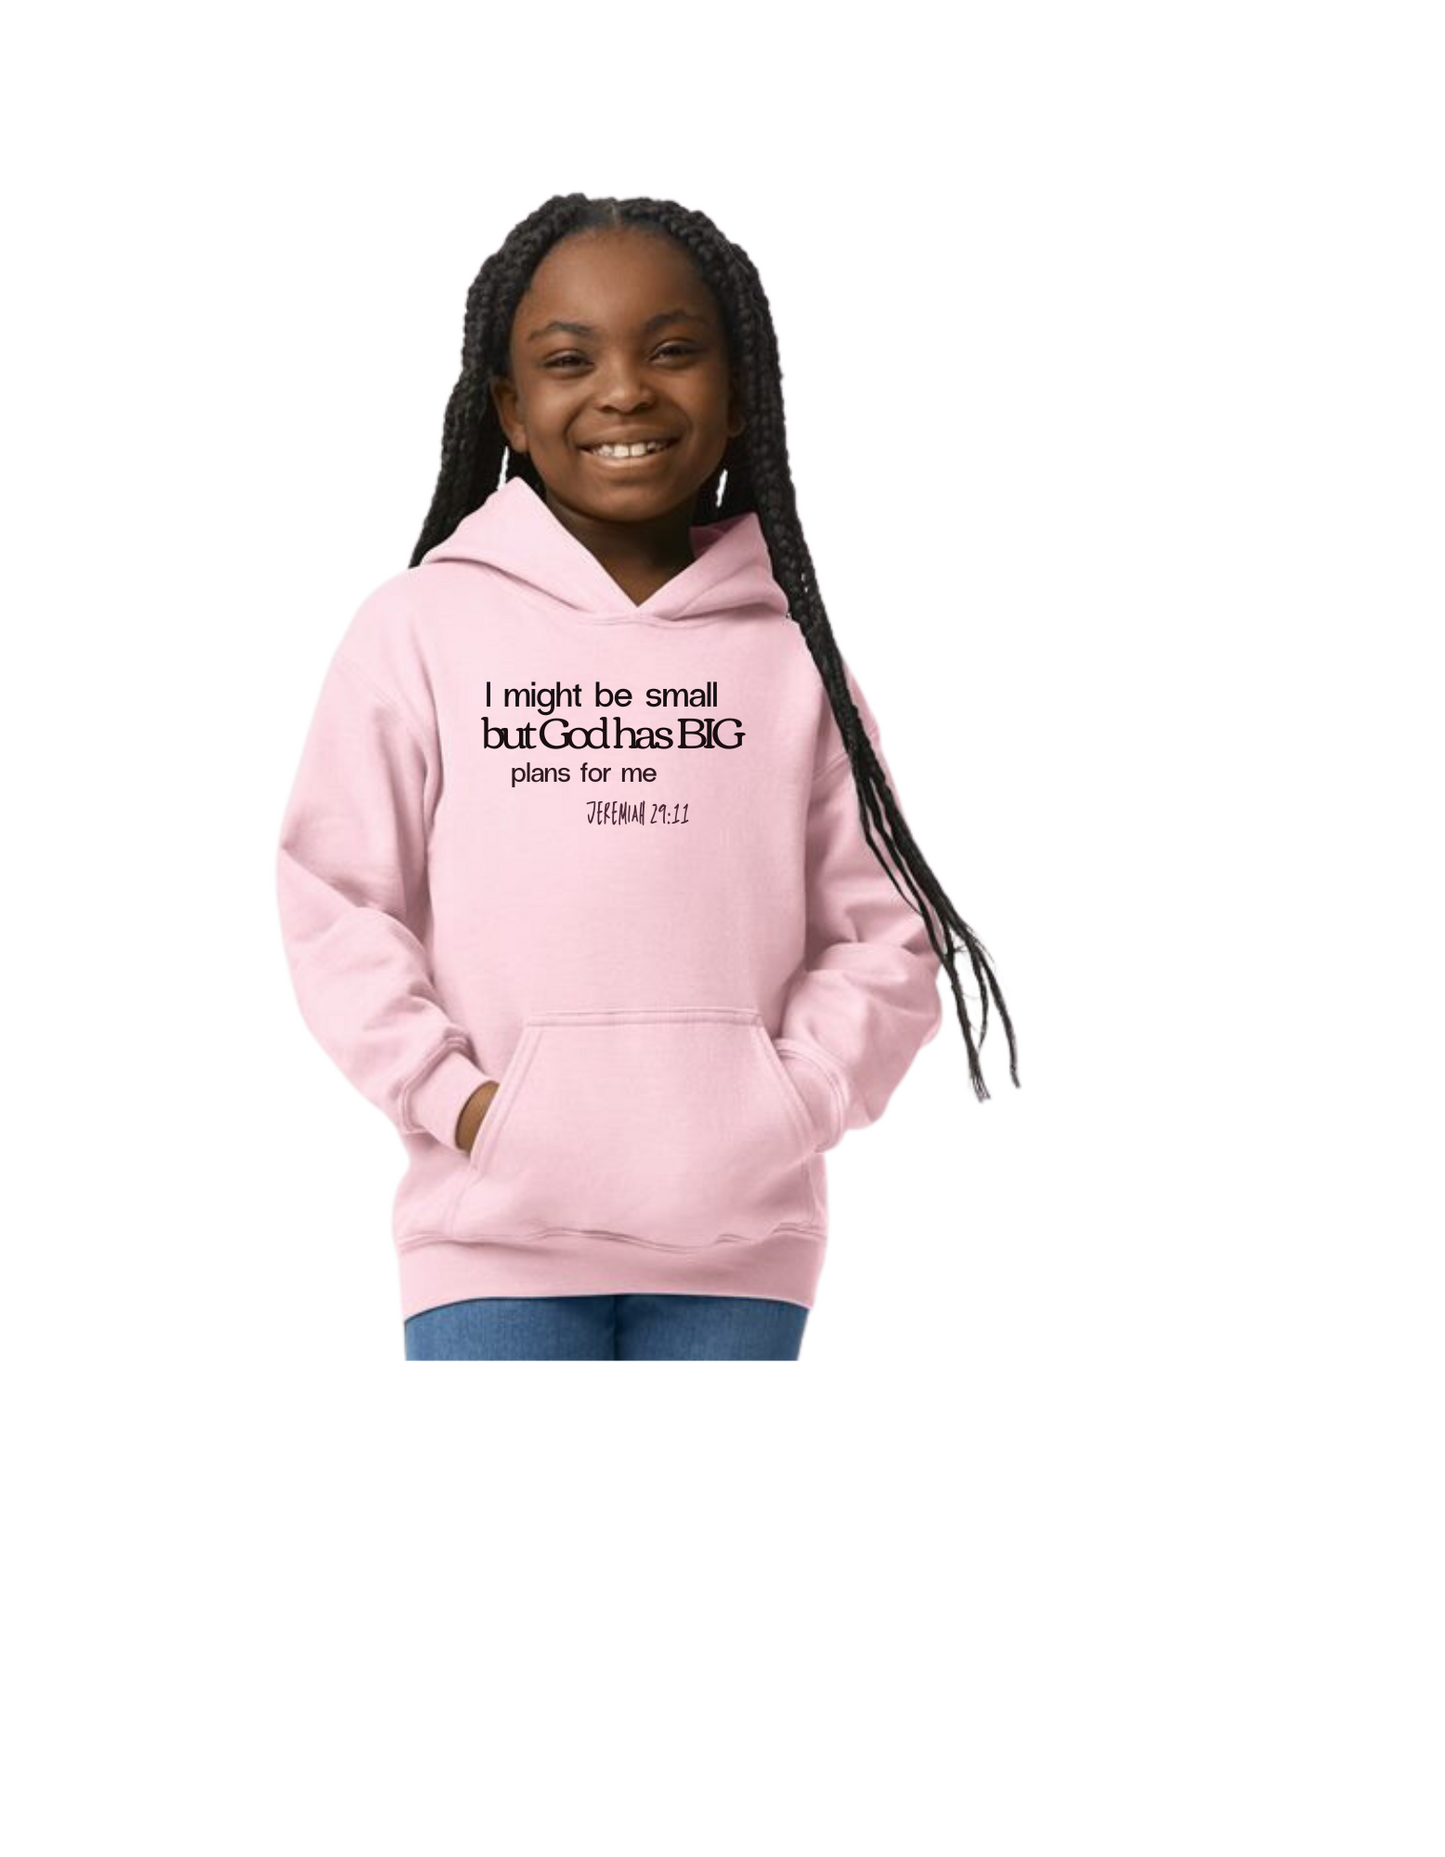 I Might Be Small But God Has Big Plans For Me/hUnisex Youth Hoodie and T-Shirt